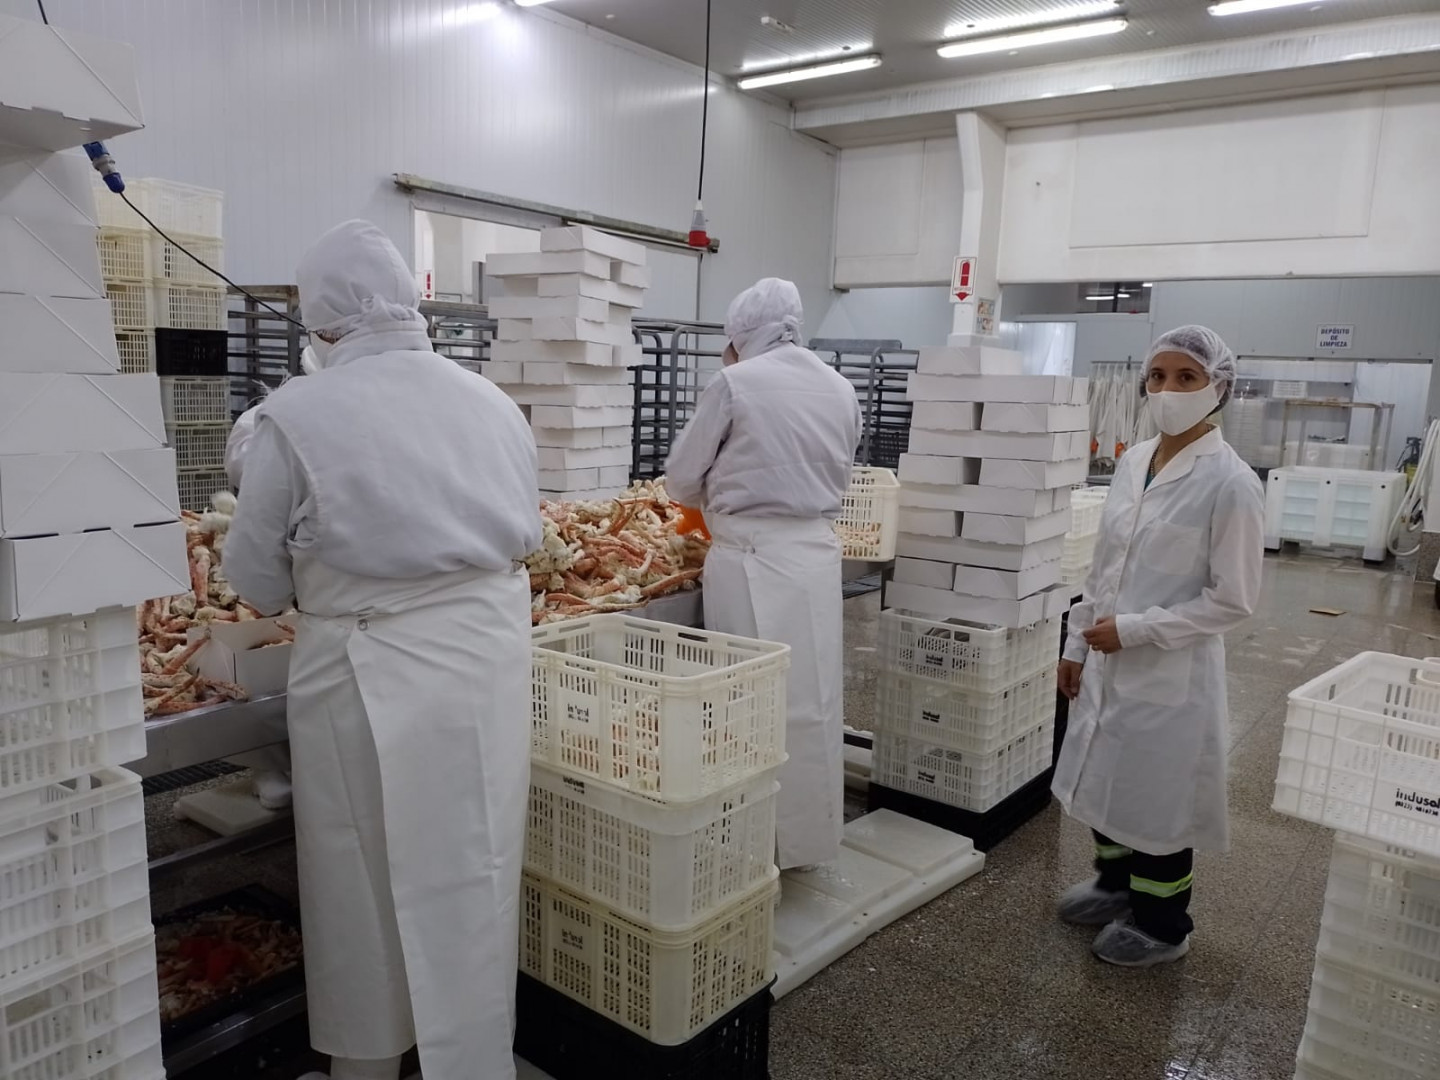 Puerto san julian: first export of king crab to the united states for direct consumption